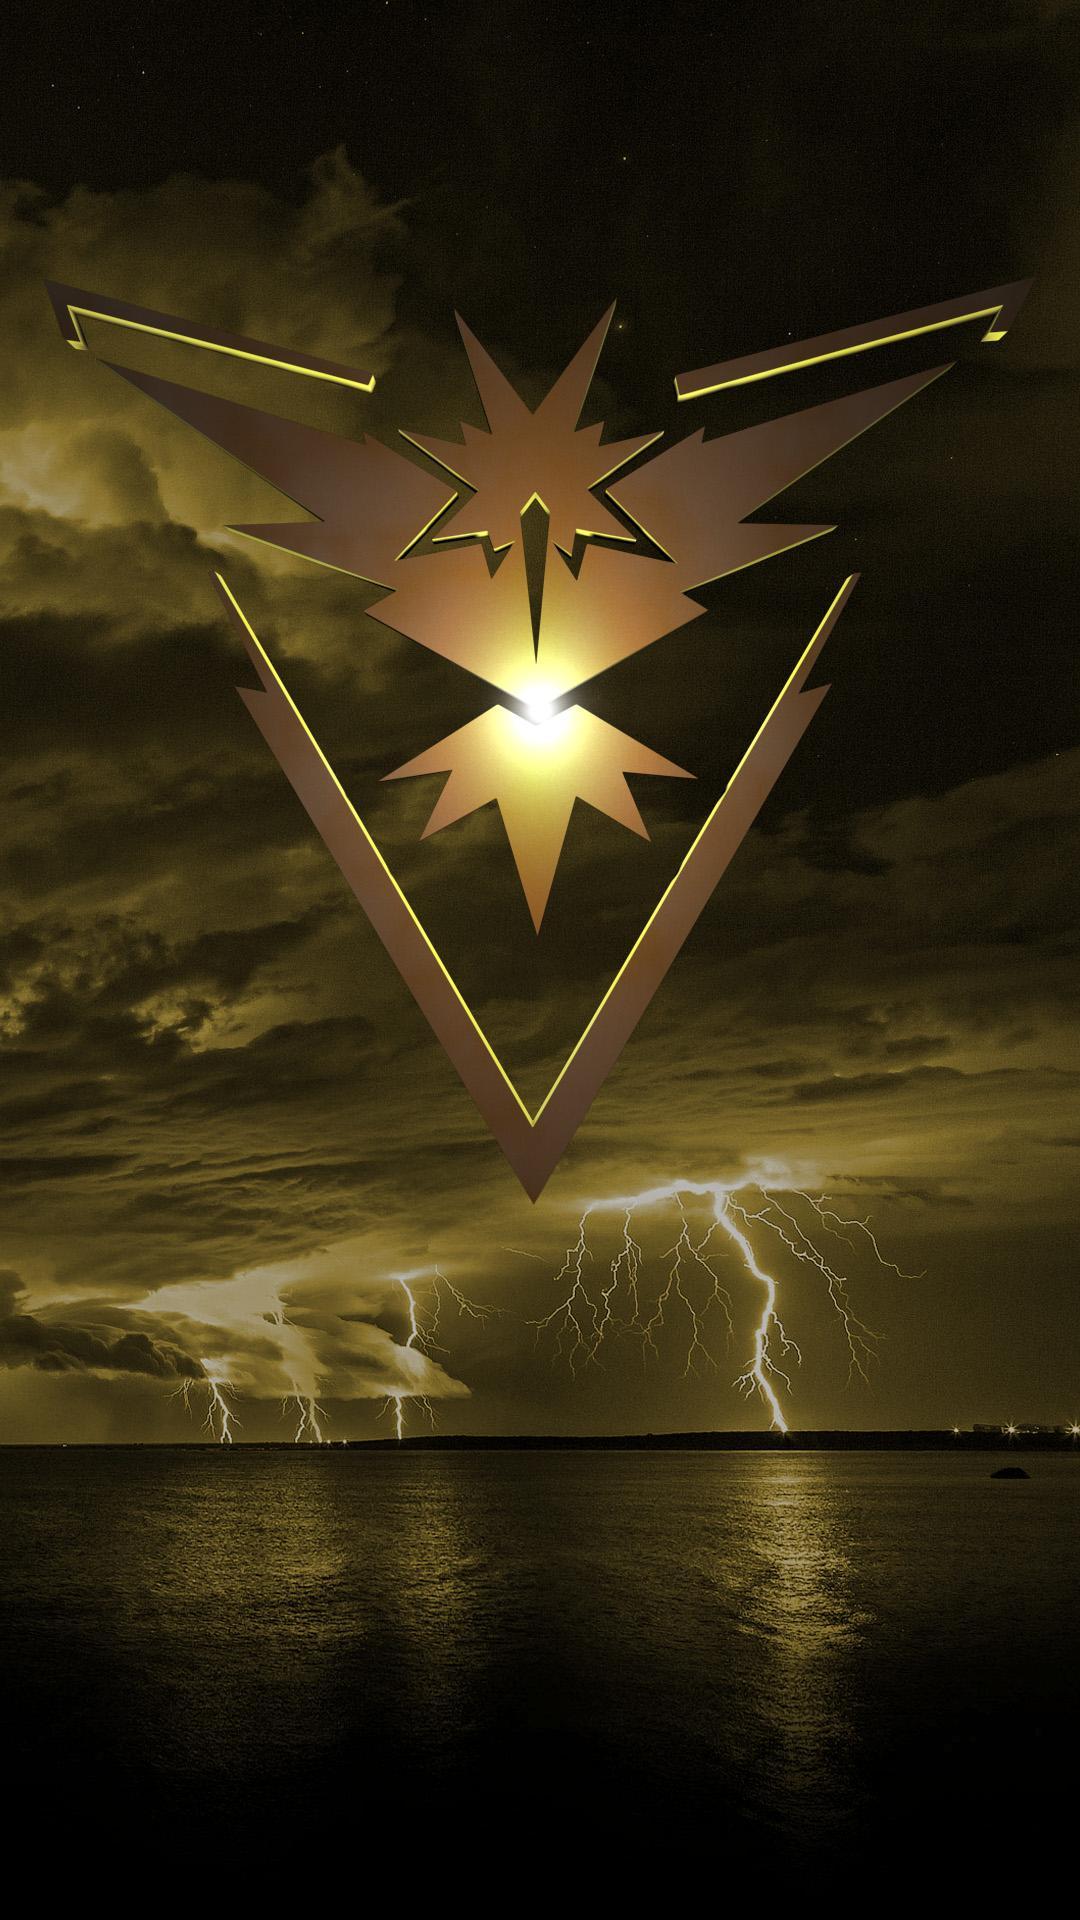 Team Instinct Logo wallpaper that was requested